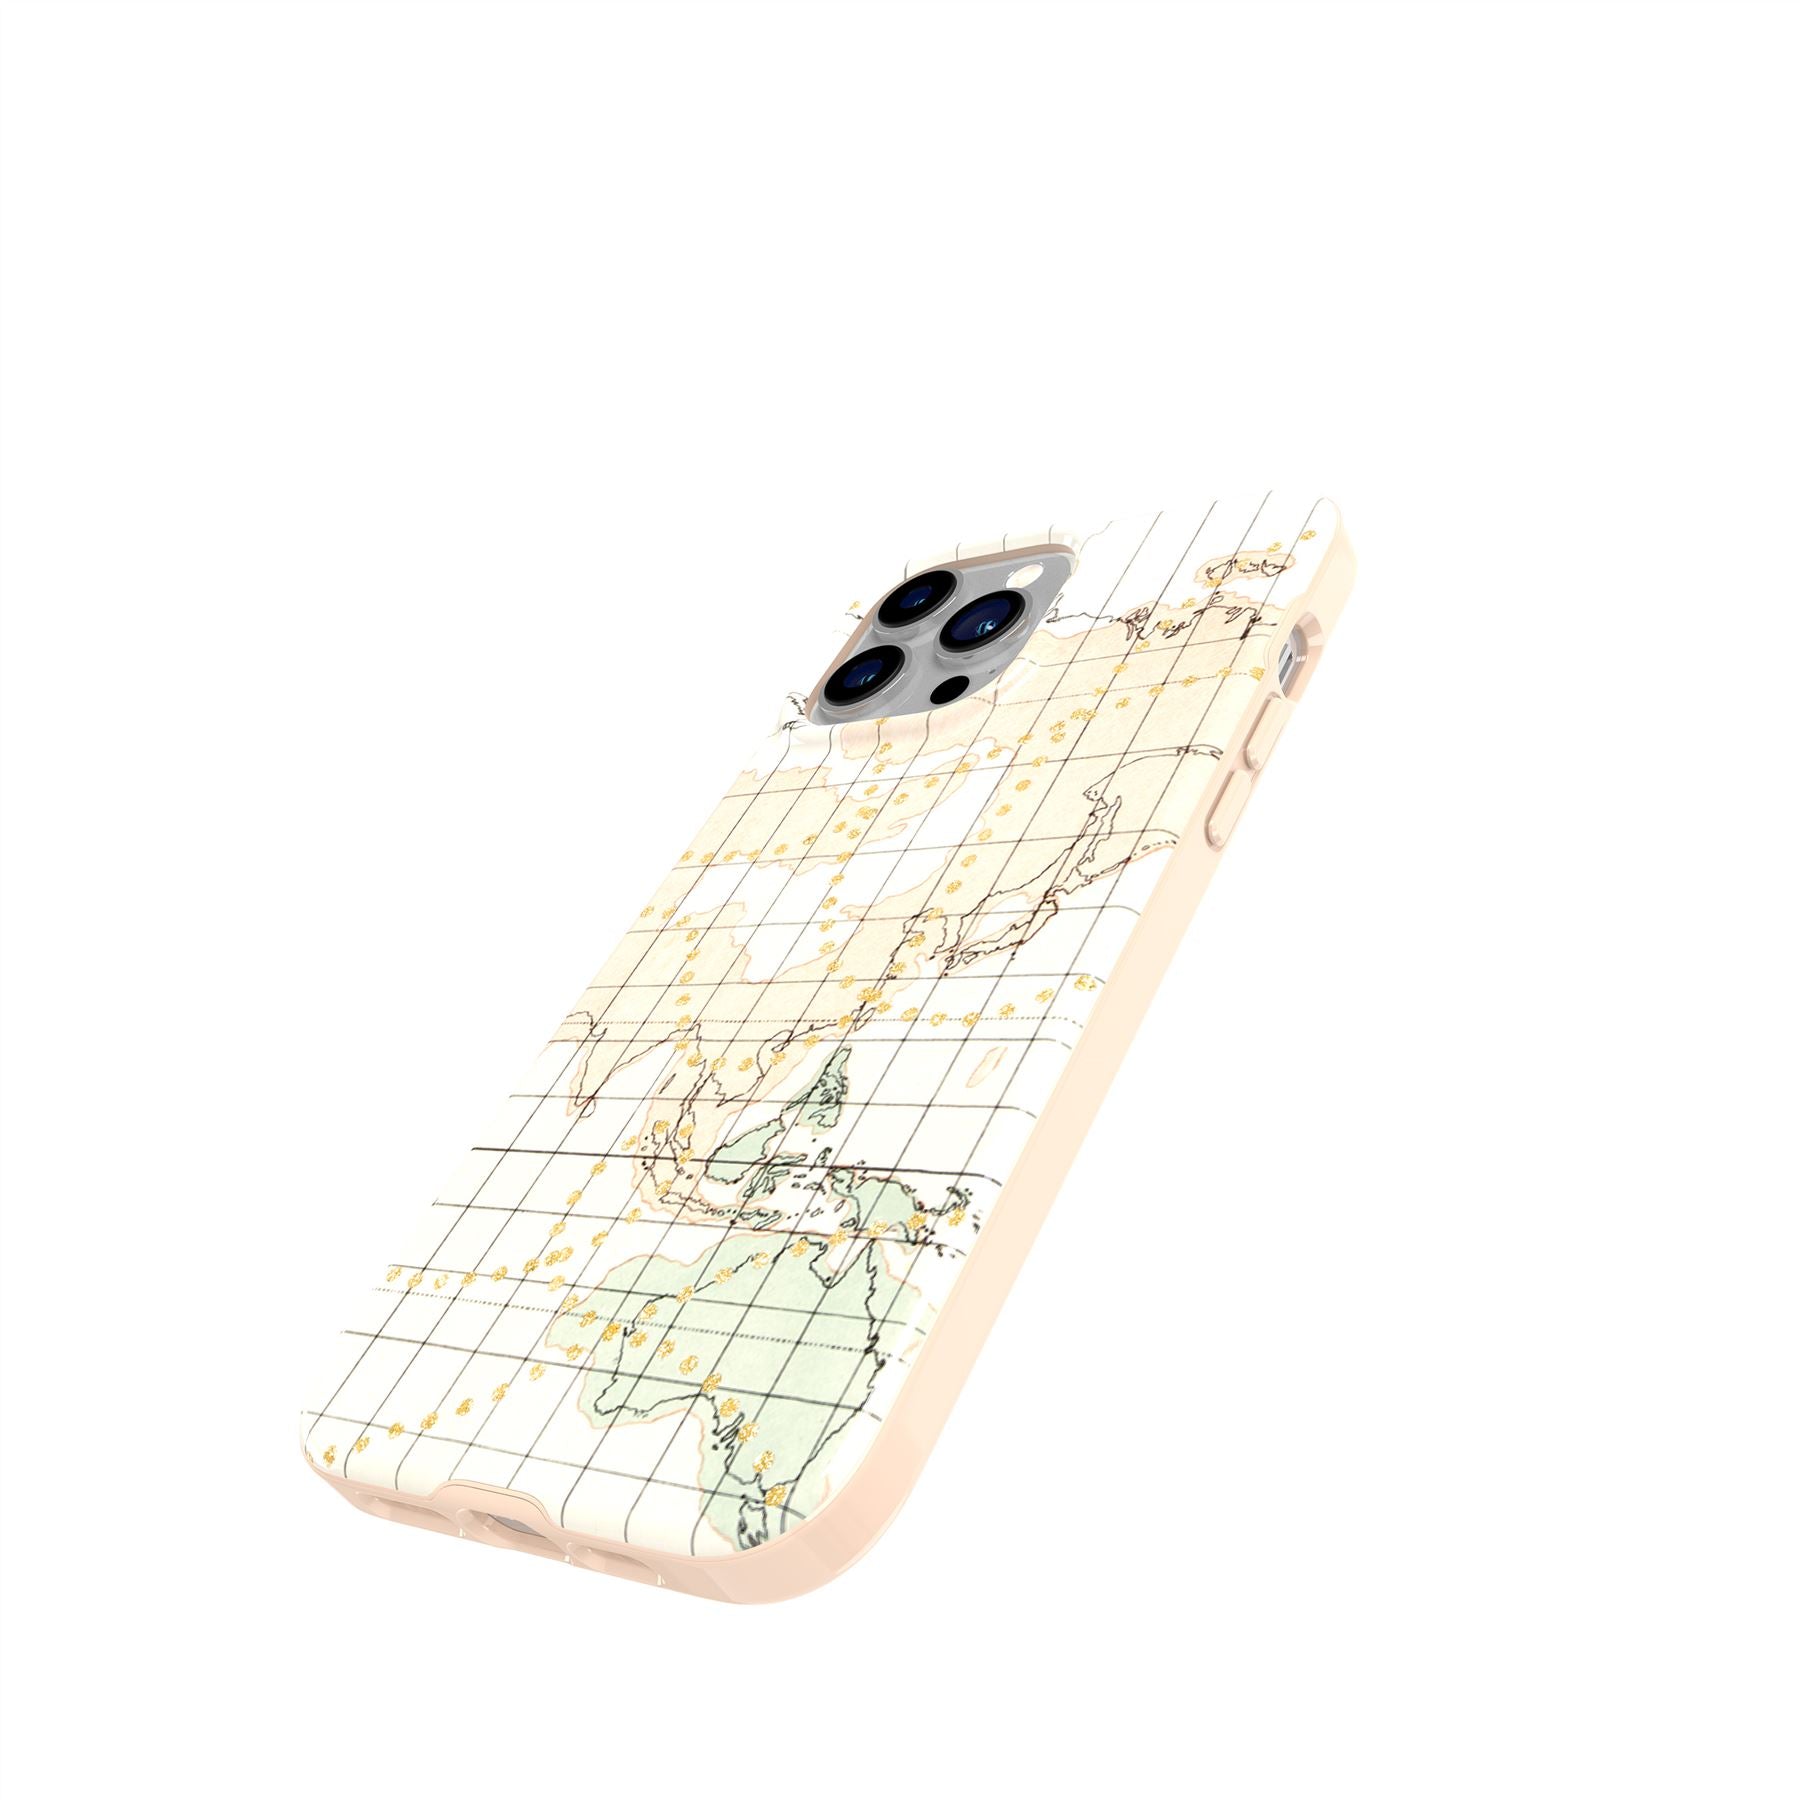 Indie Collage Case Compatible with iPhone 12 Pro Max,Aesthetic Art